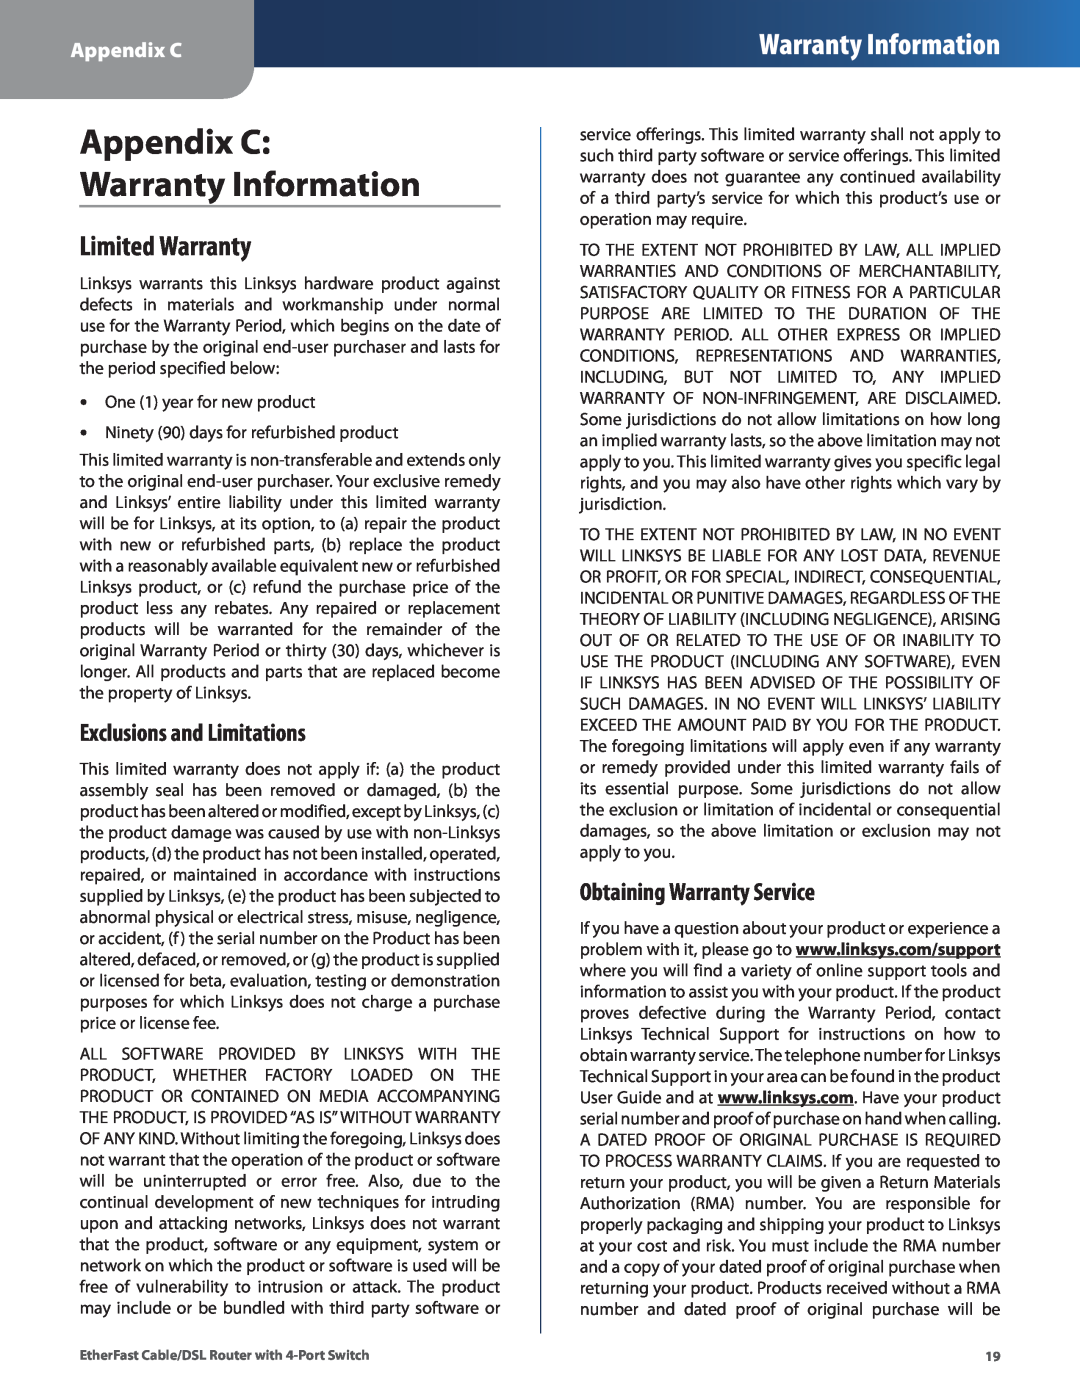 Honeywell HEMS II manual Appendix C Warranty Information, Limited Warranty, Exclusions and Limitations 